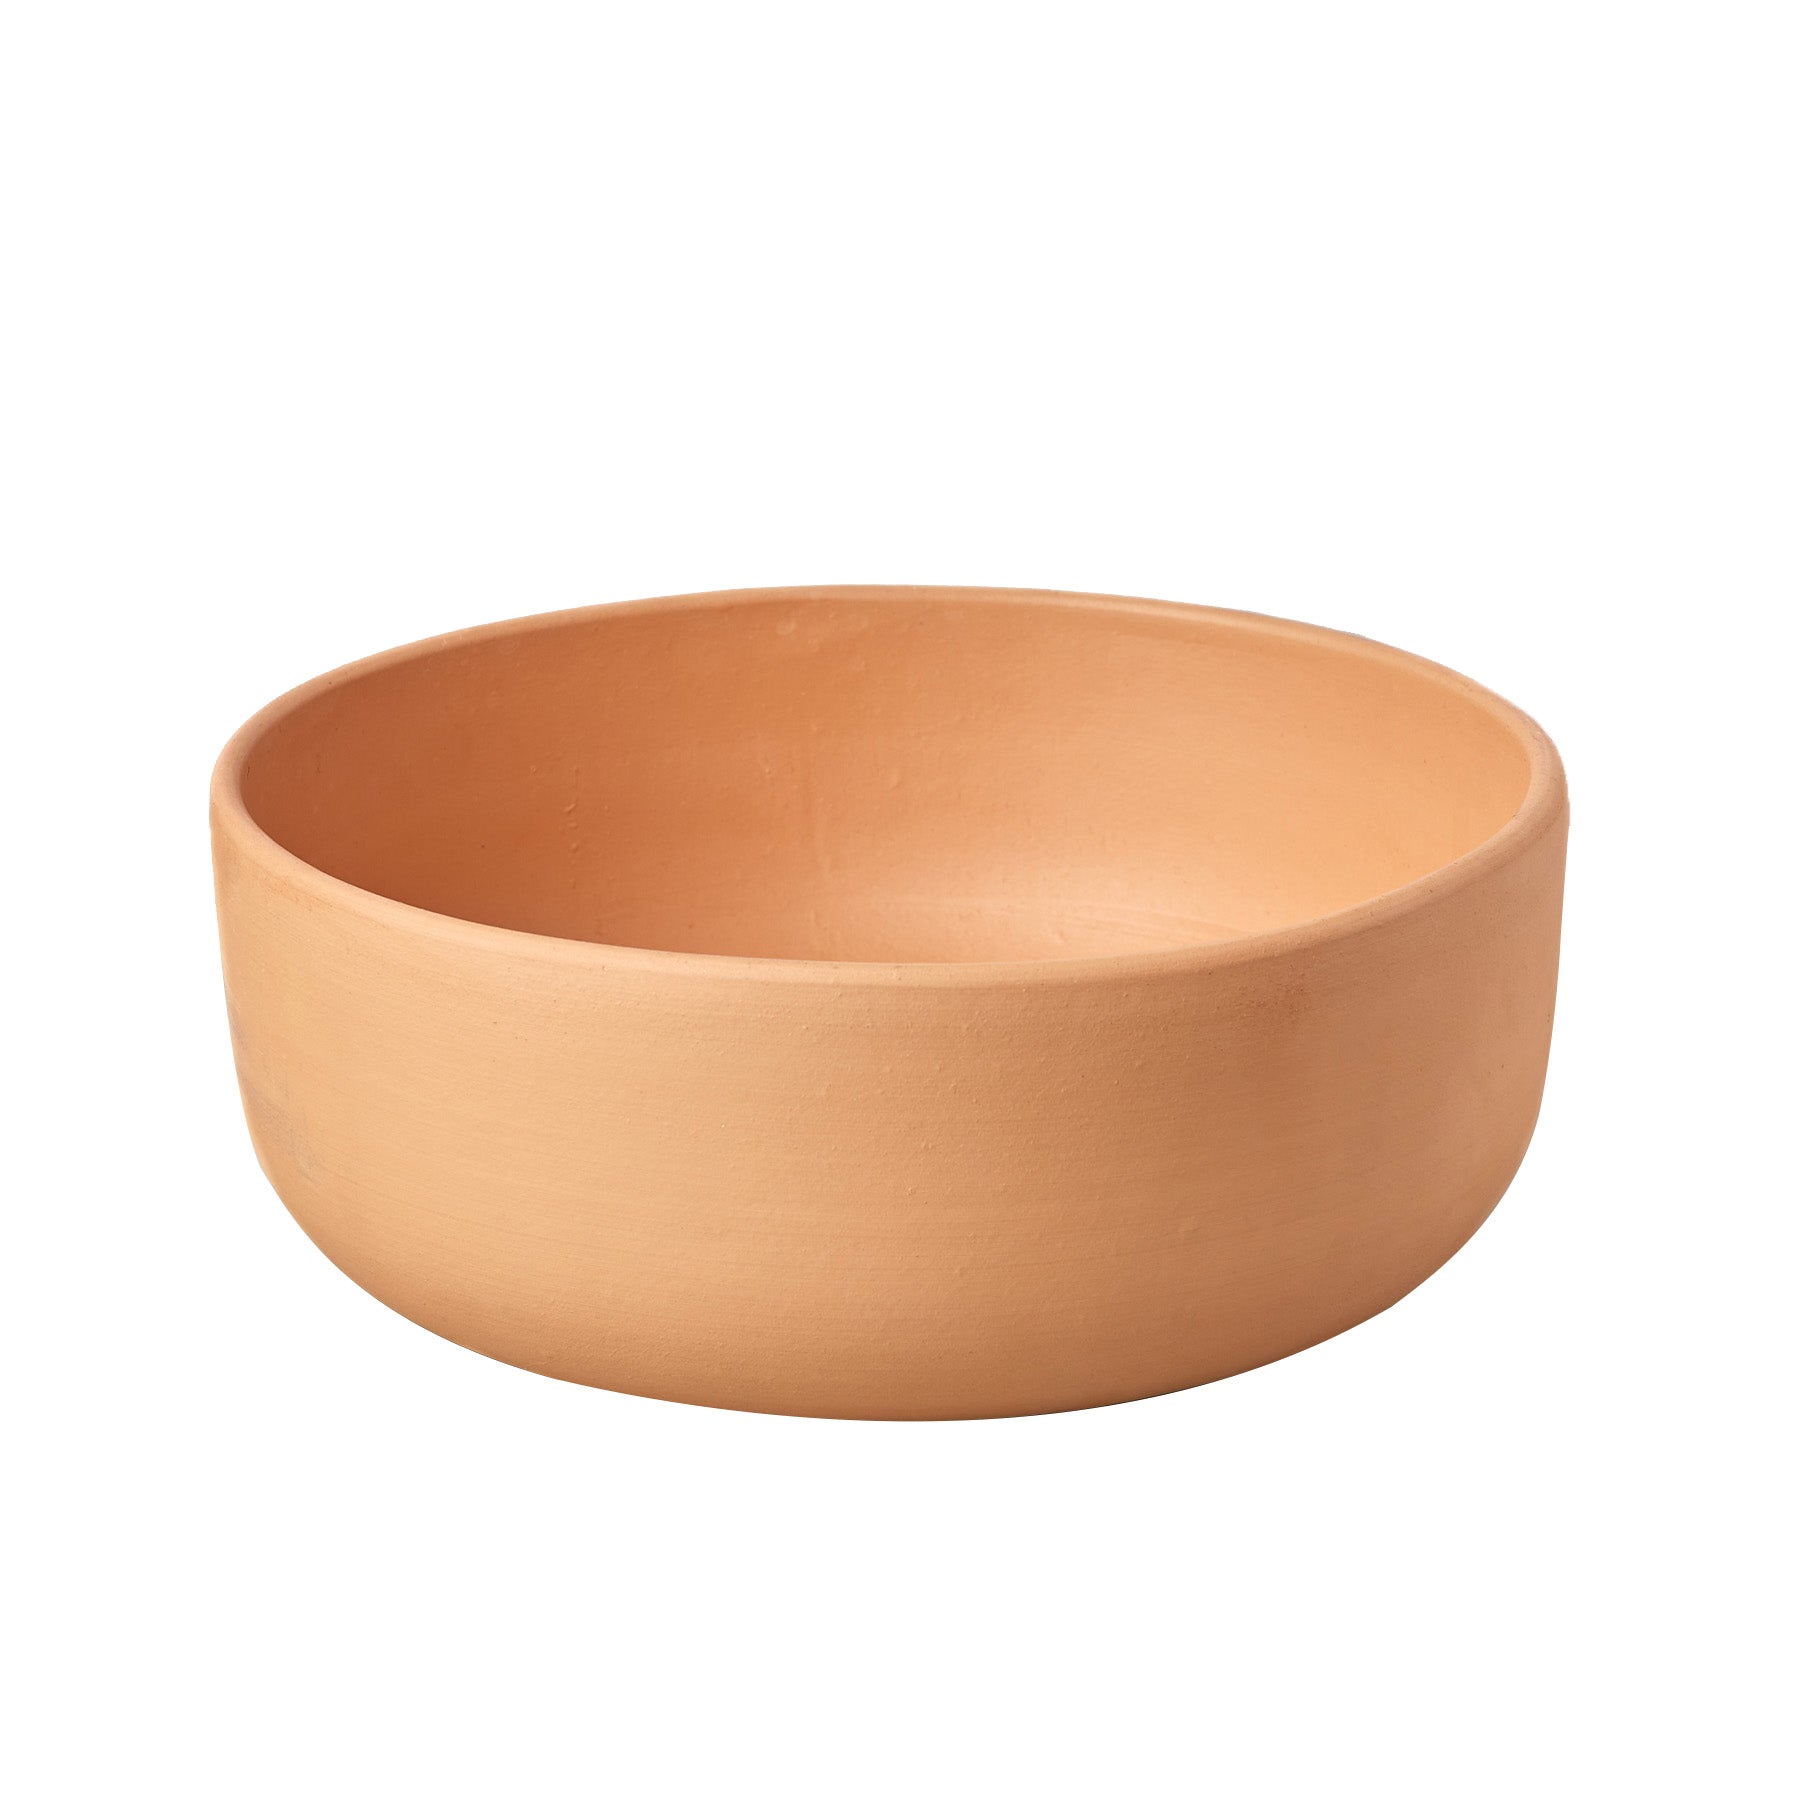 A terracotta bowl on a white background at the best garden nursery near me.